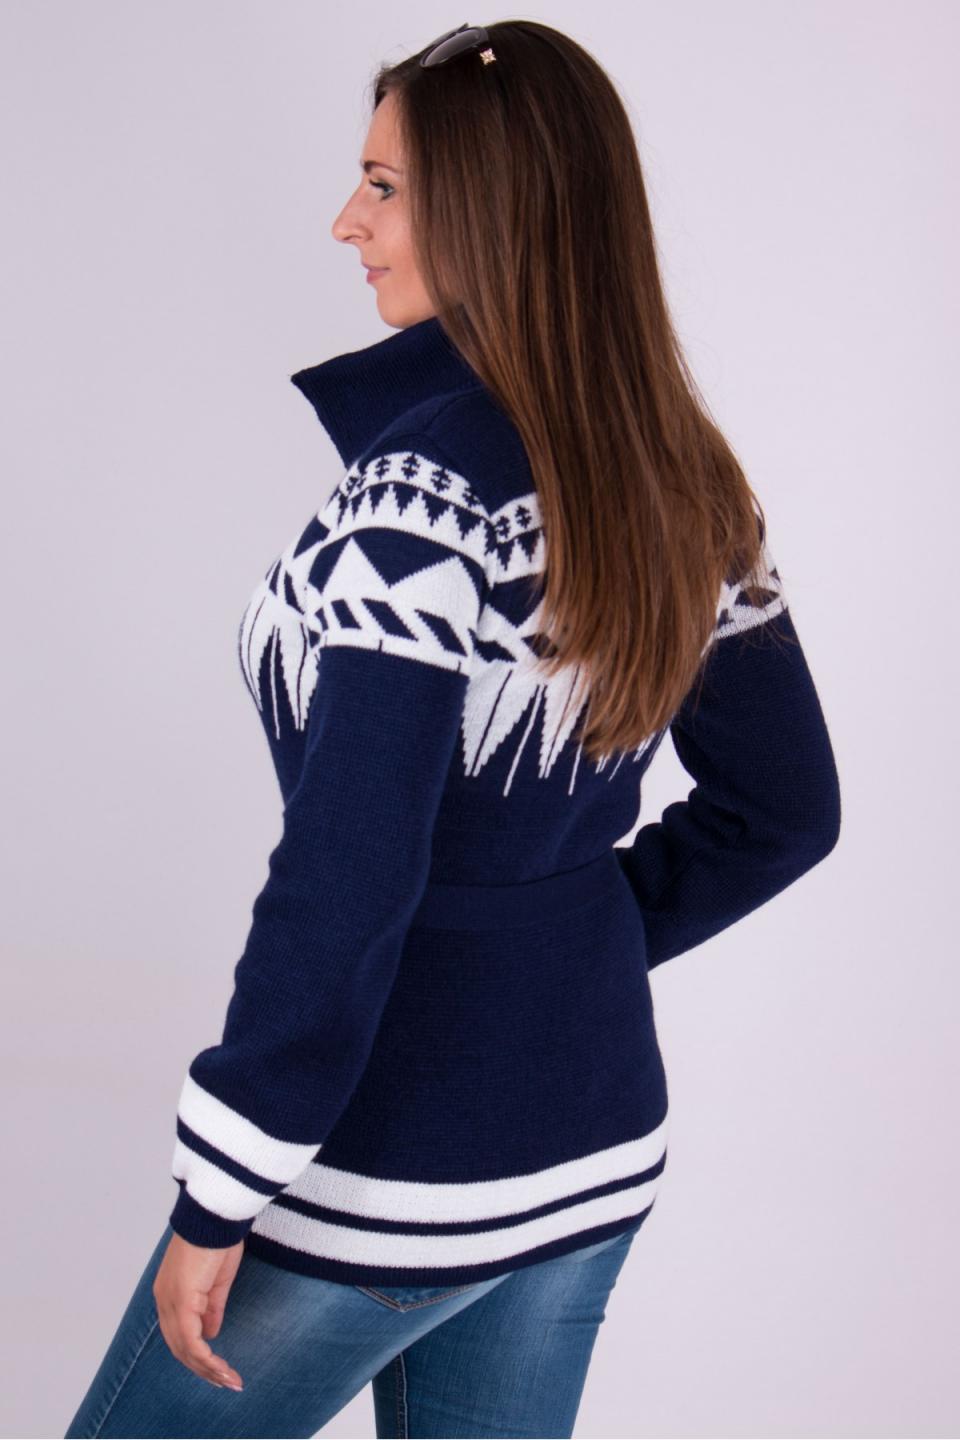 Knitted sweater with a zipper &quot;Toffee&quot; (blue, white)